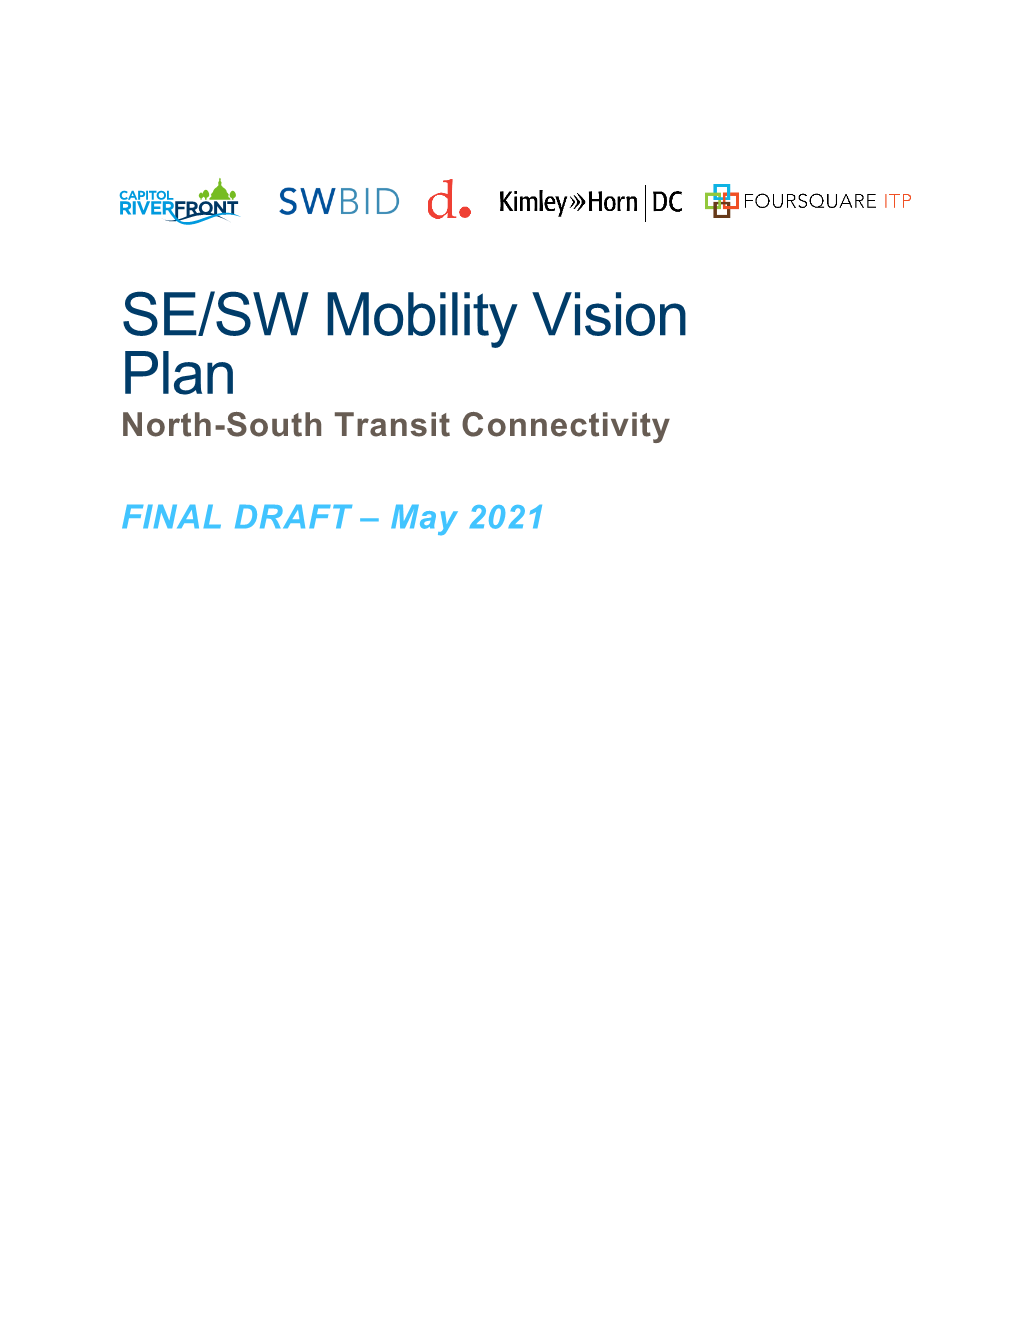 SE/SW Mobility Vision Plan North-South Transit Connectivity